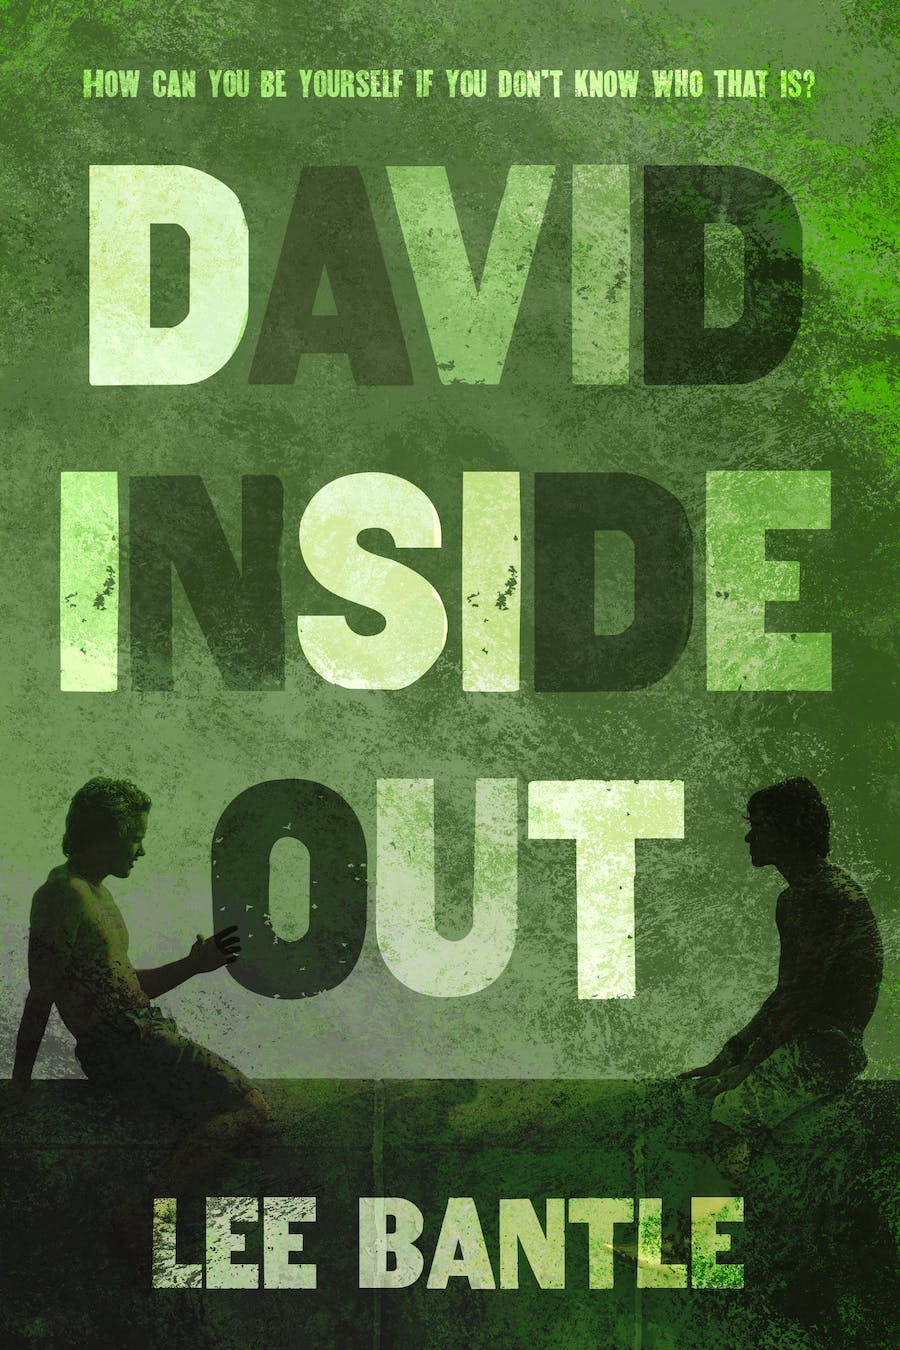 david-inside-out-11-12